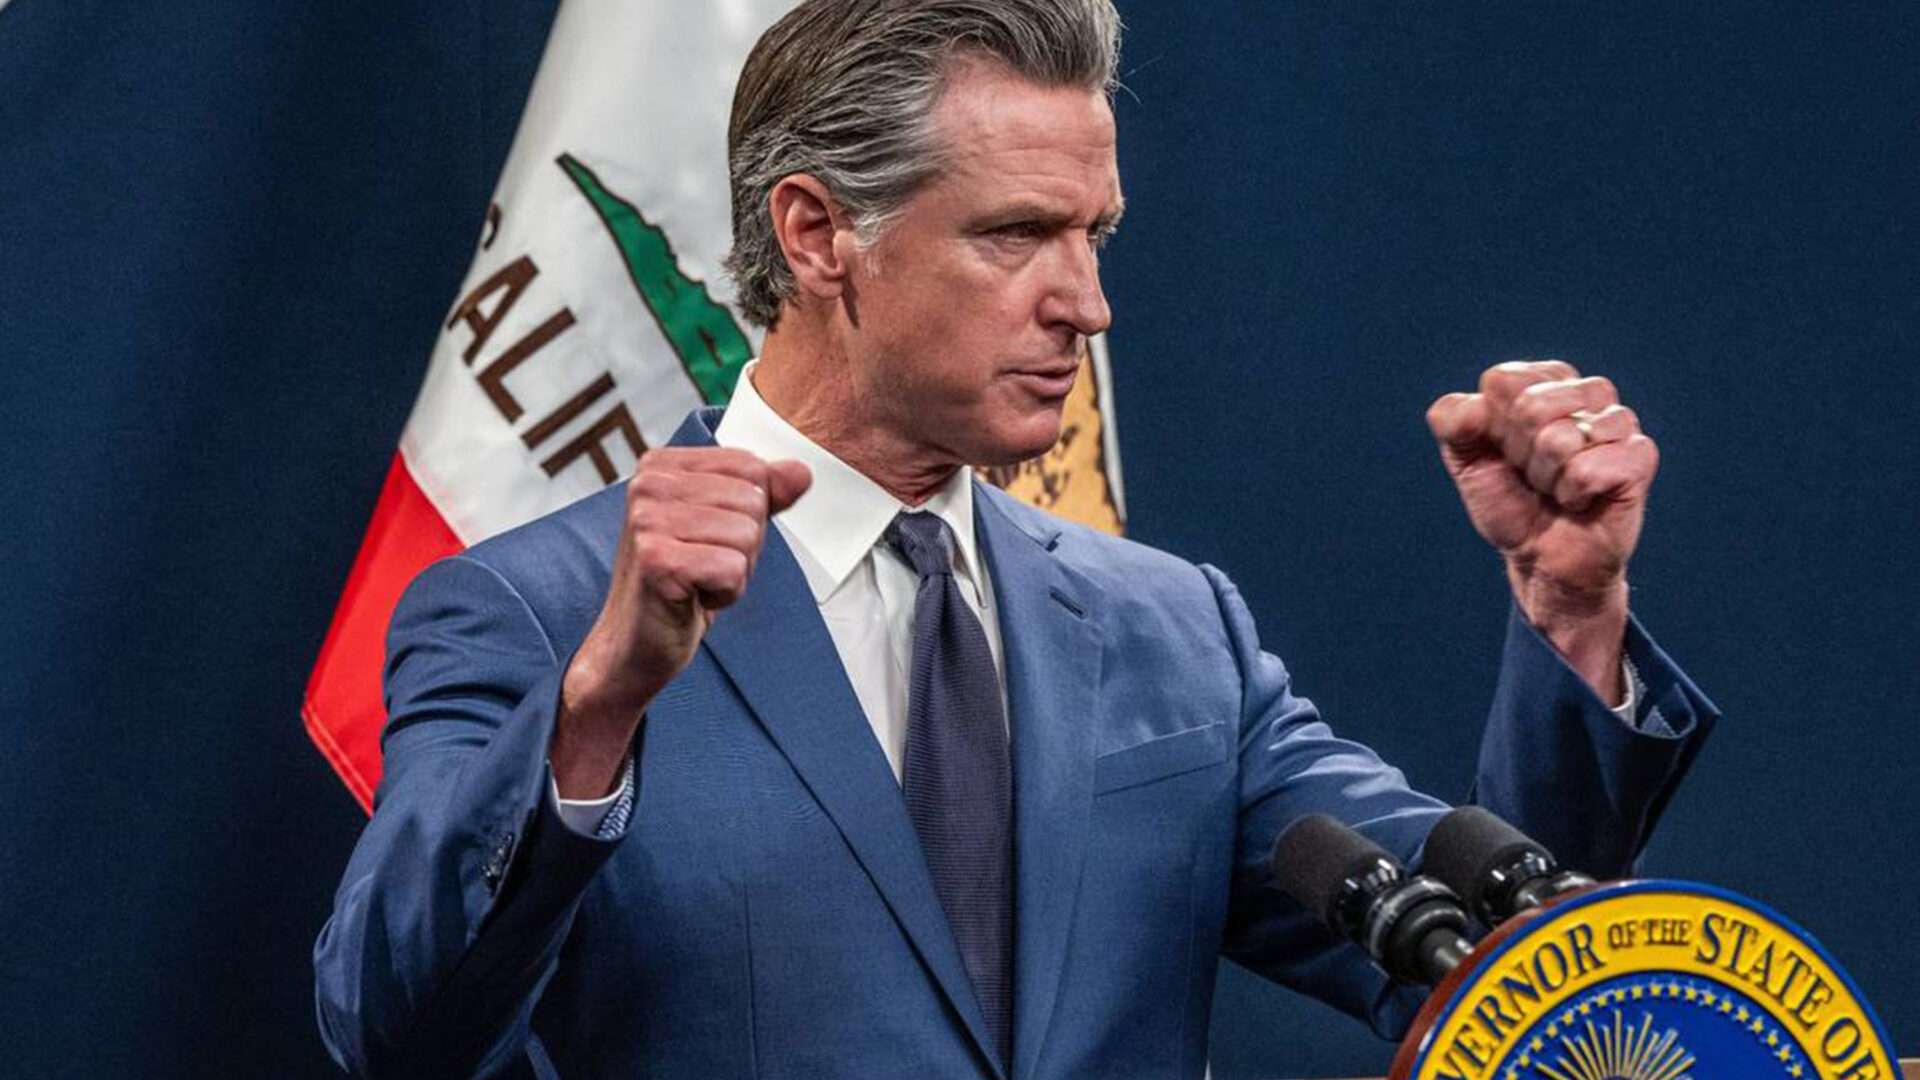 Gavin Newsom Is 'Pro-Choice' on Abortion and Nothing Else